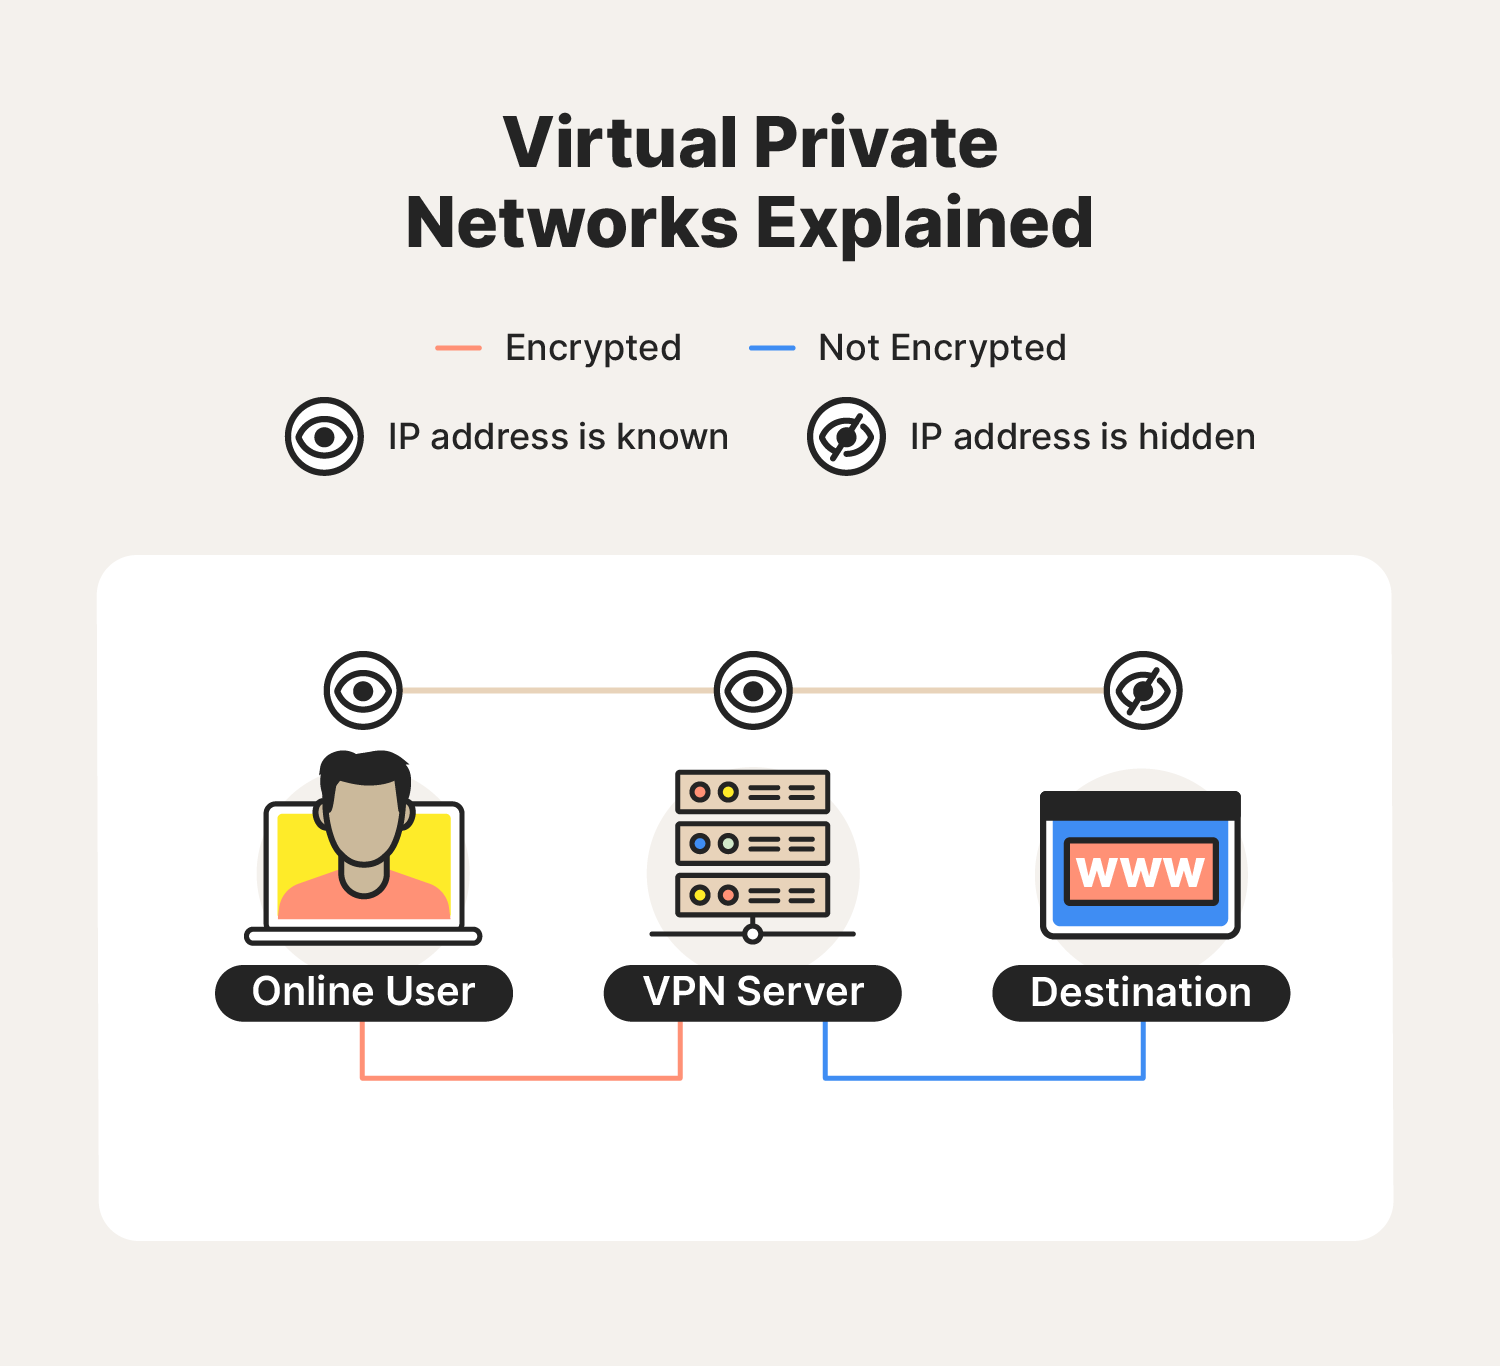 A graphic explains how virtual private networks work, highlighting a key difference between Tor vs. VPN networks.